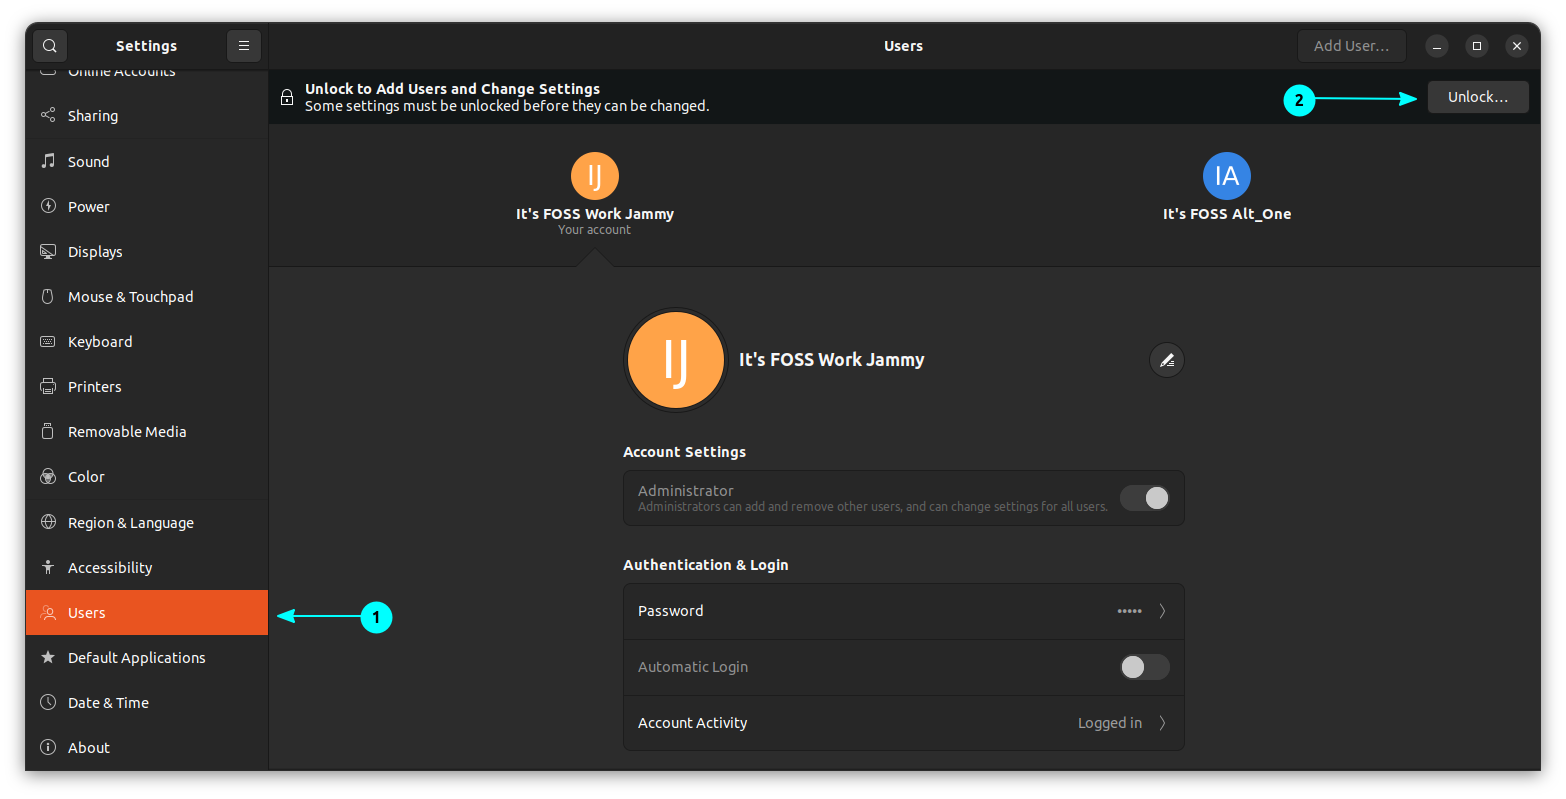 Go to Users in Ubuntu GNOME settings and Unlock the section using the current logged in user password